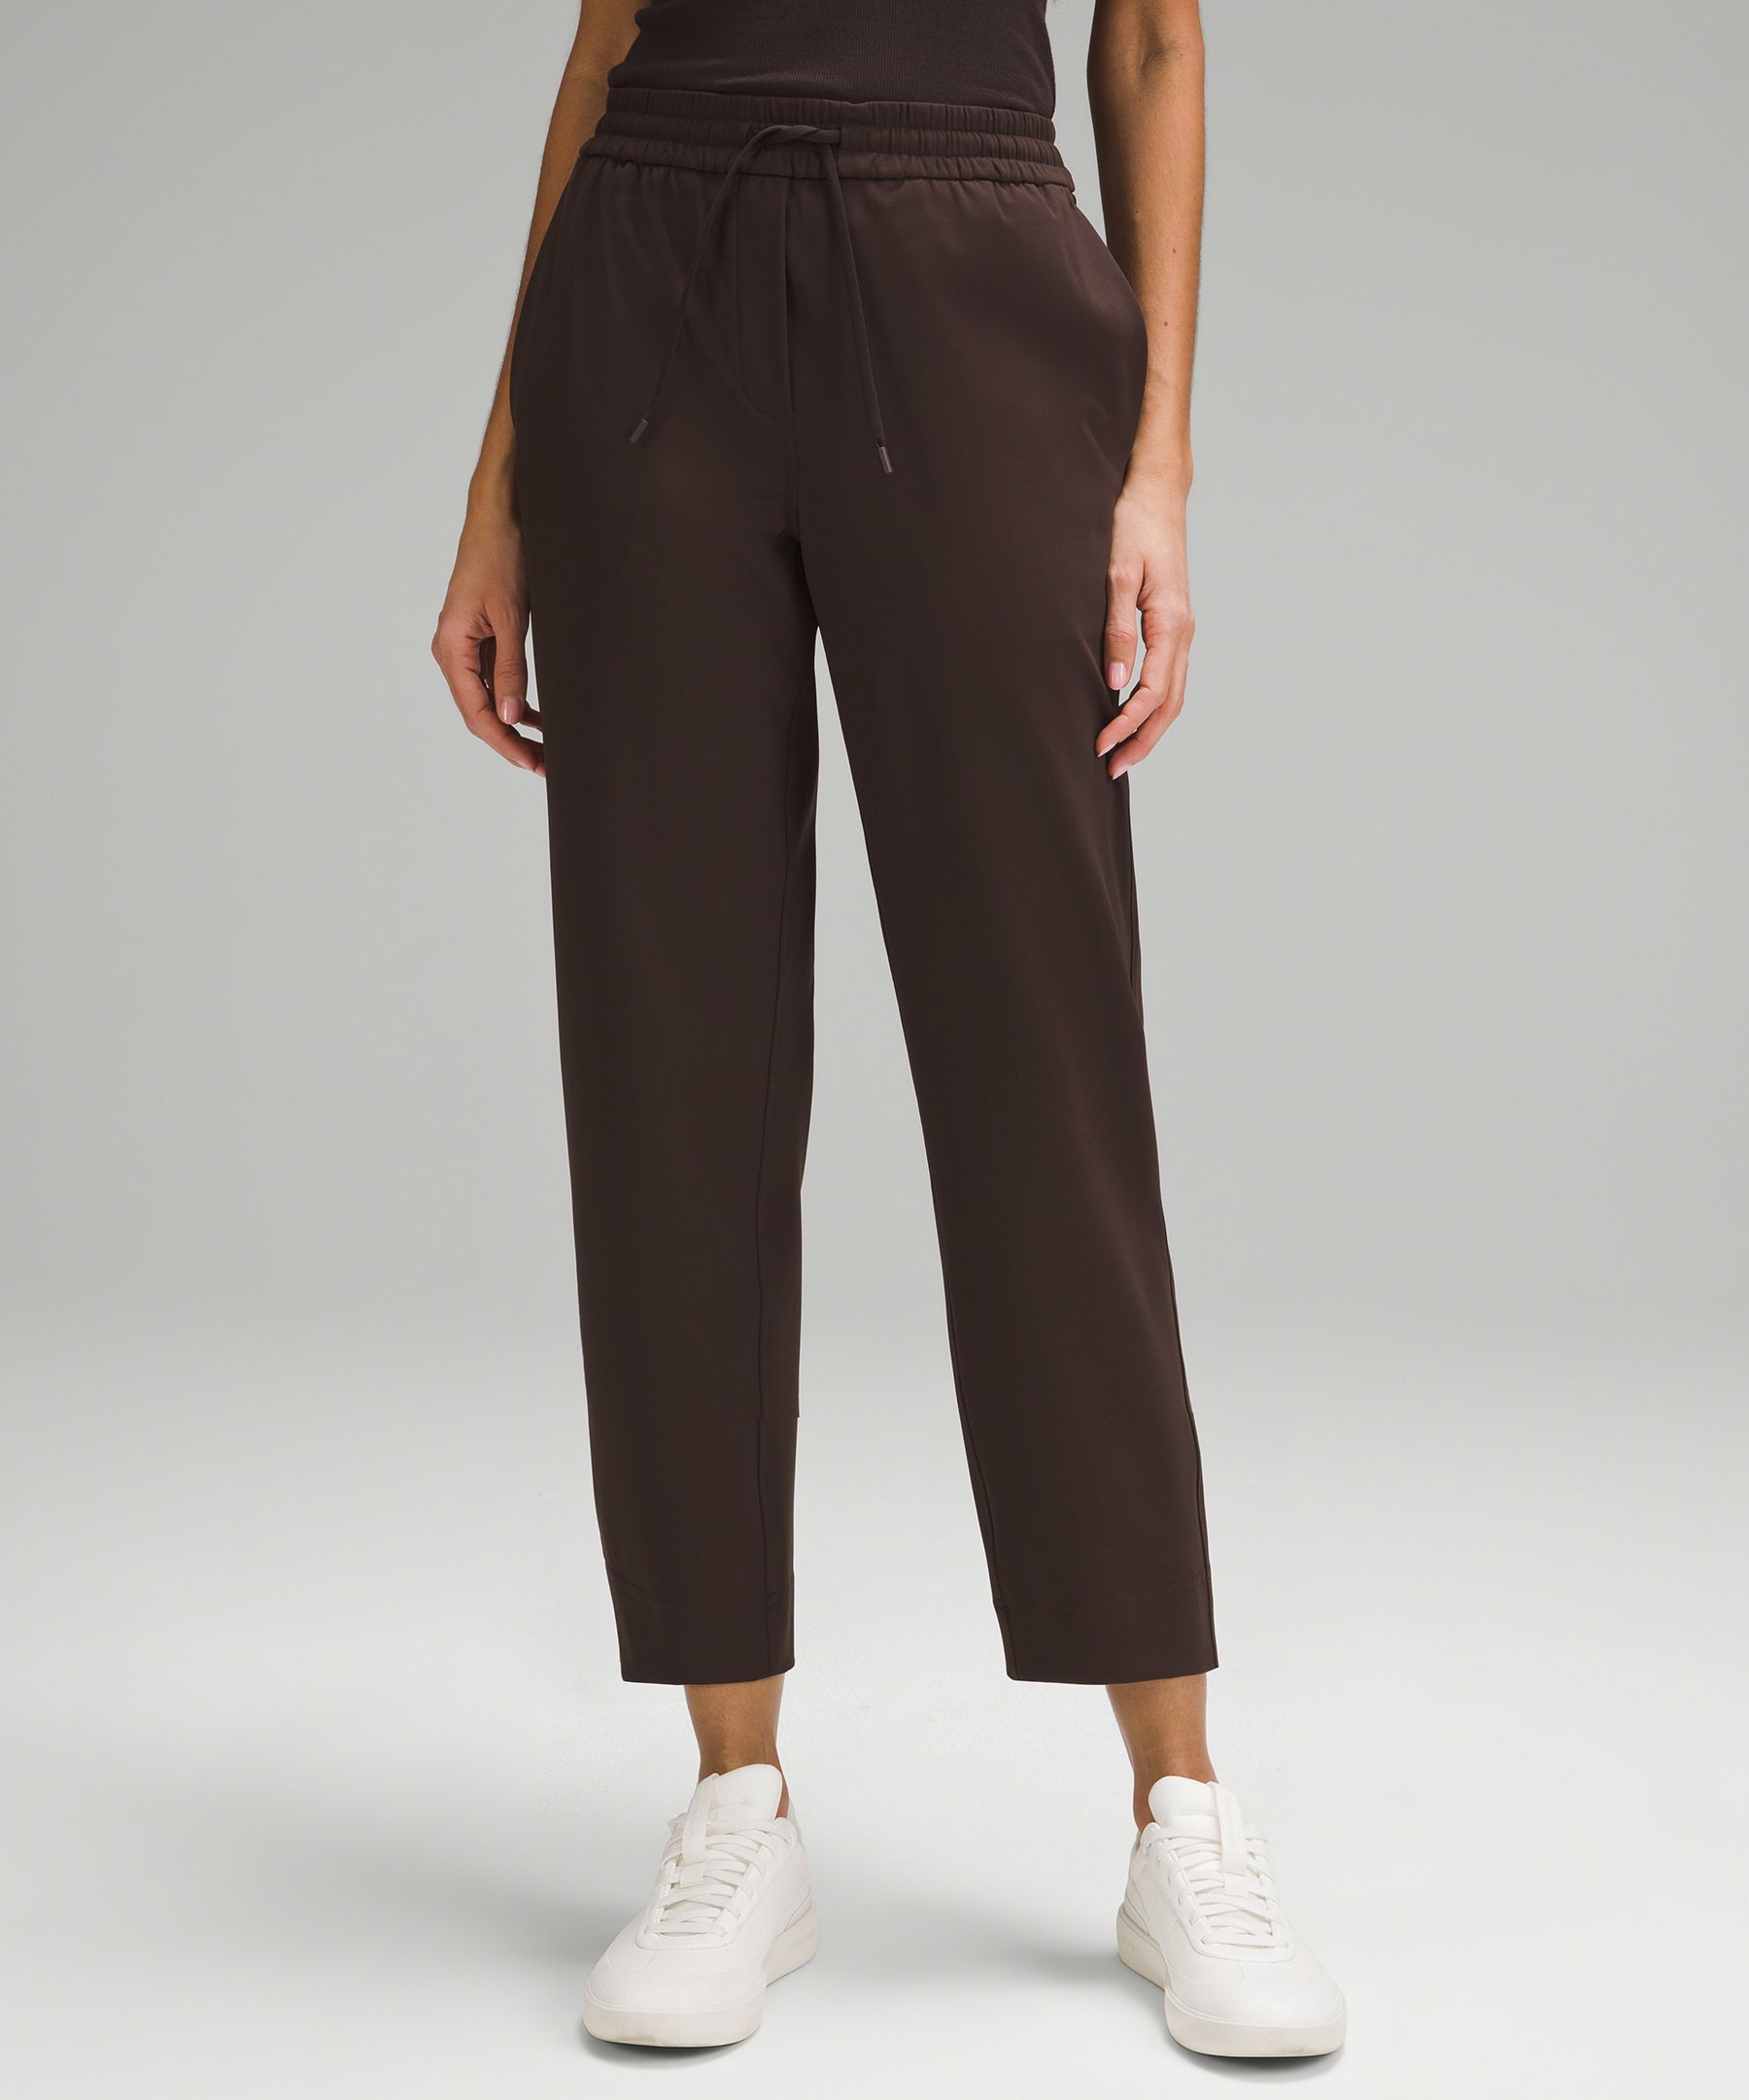 Work fit: Tapered-Leg Mid-Rise Pant 7/8 Length in Espresso and